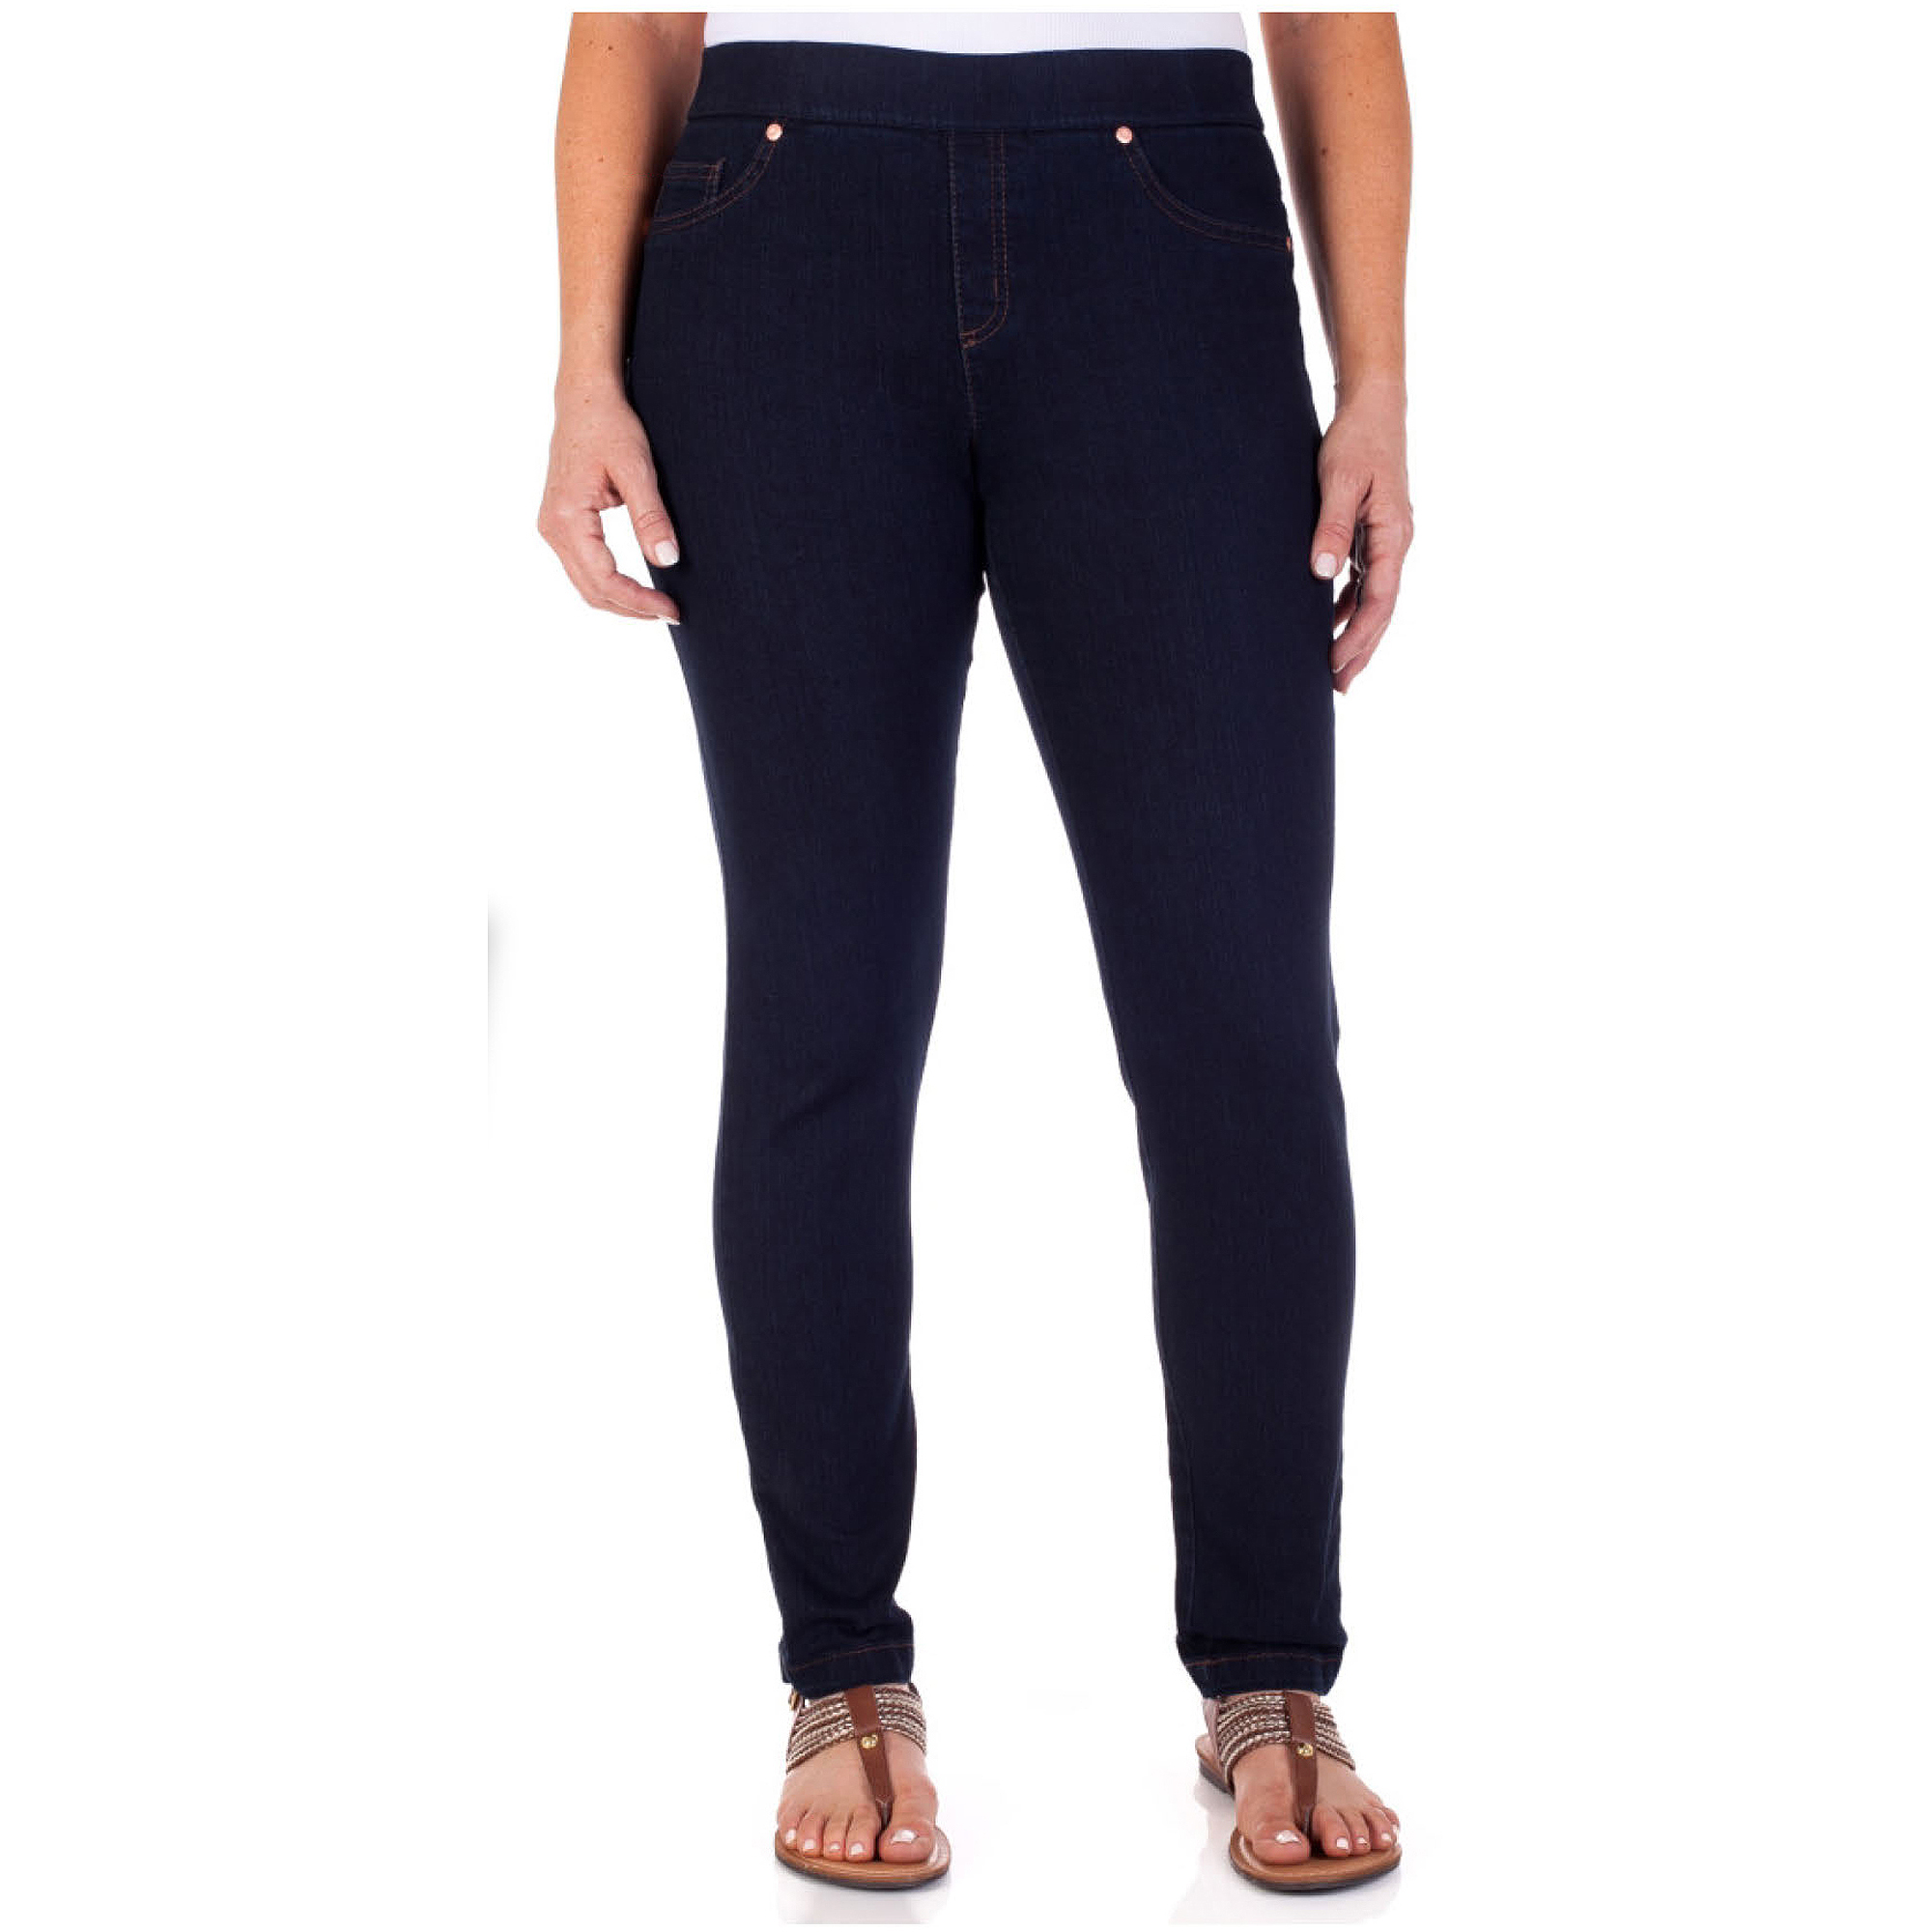 Women's Denim Jeggings, available in Regular and Petite! - image 1 of 3